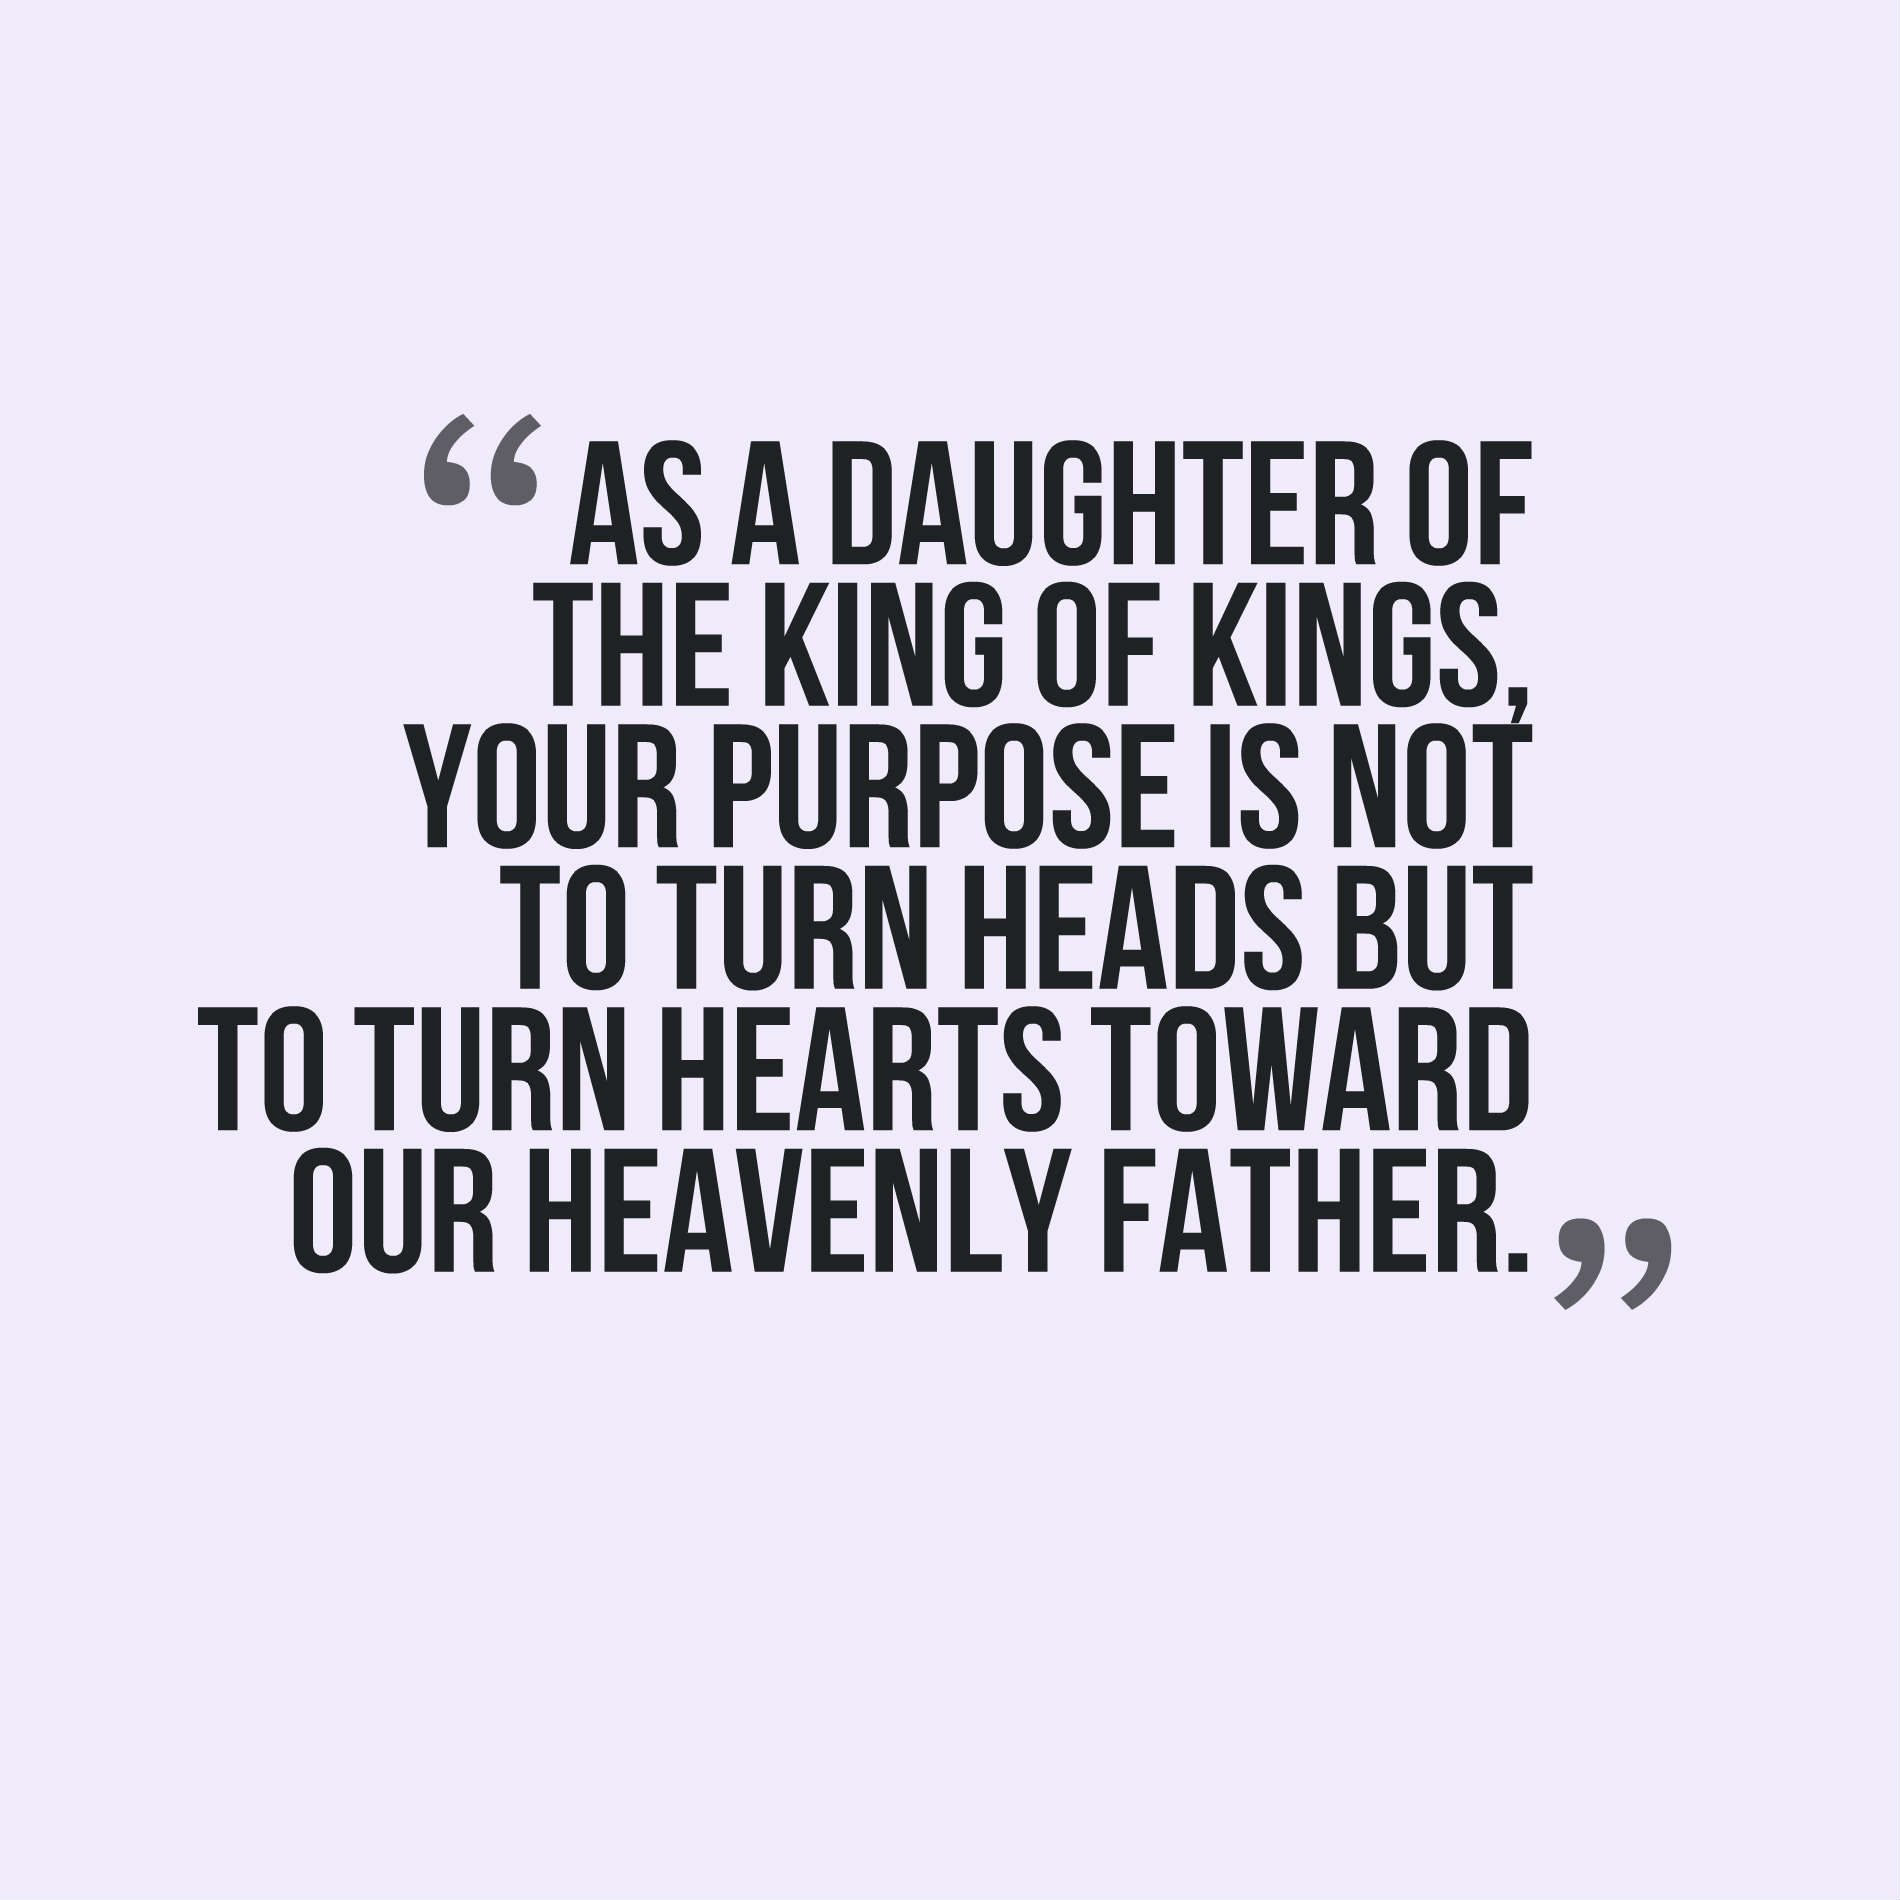 As a daughter of the king of kings, your purpose is not to turn heads but to turn hearts toward our Heavenly Father.